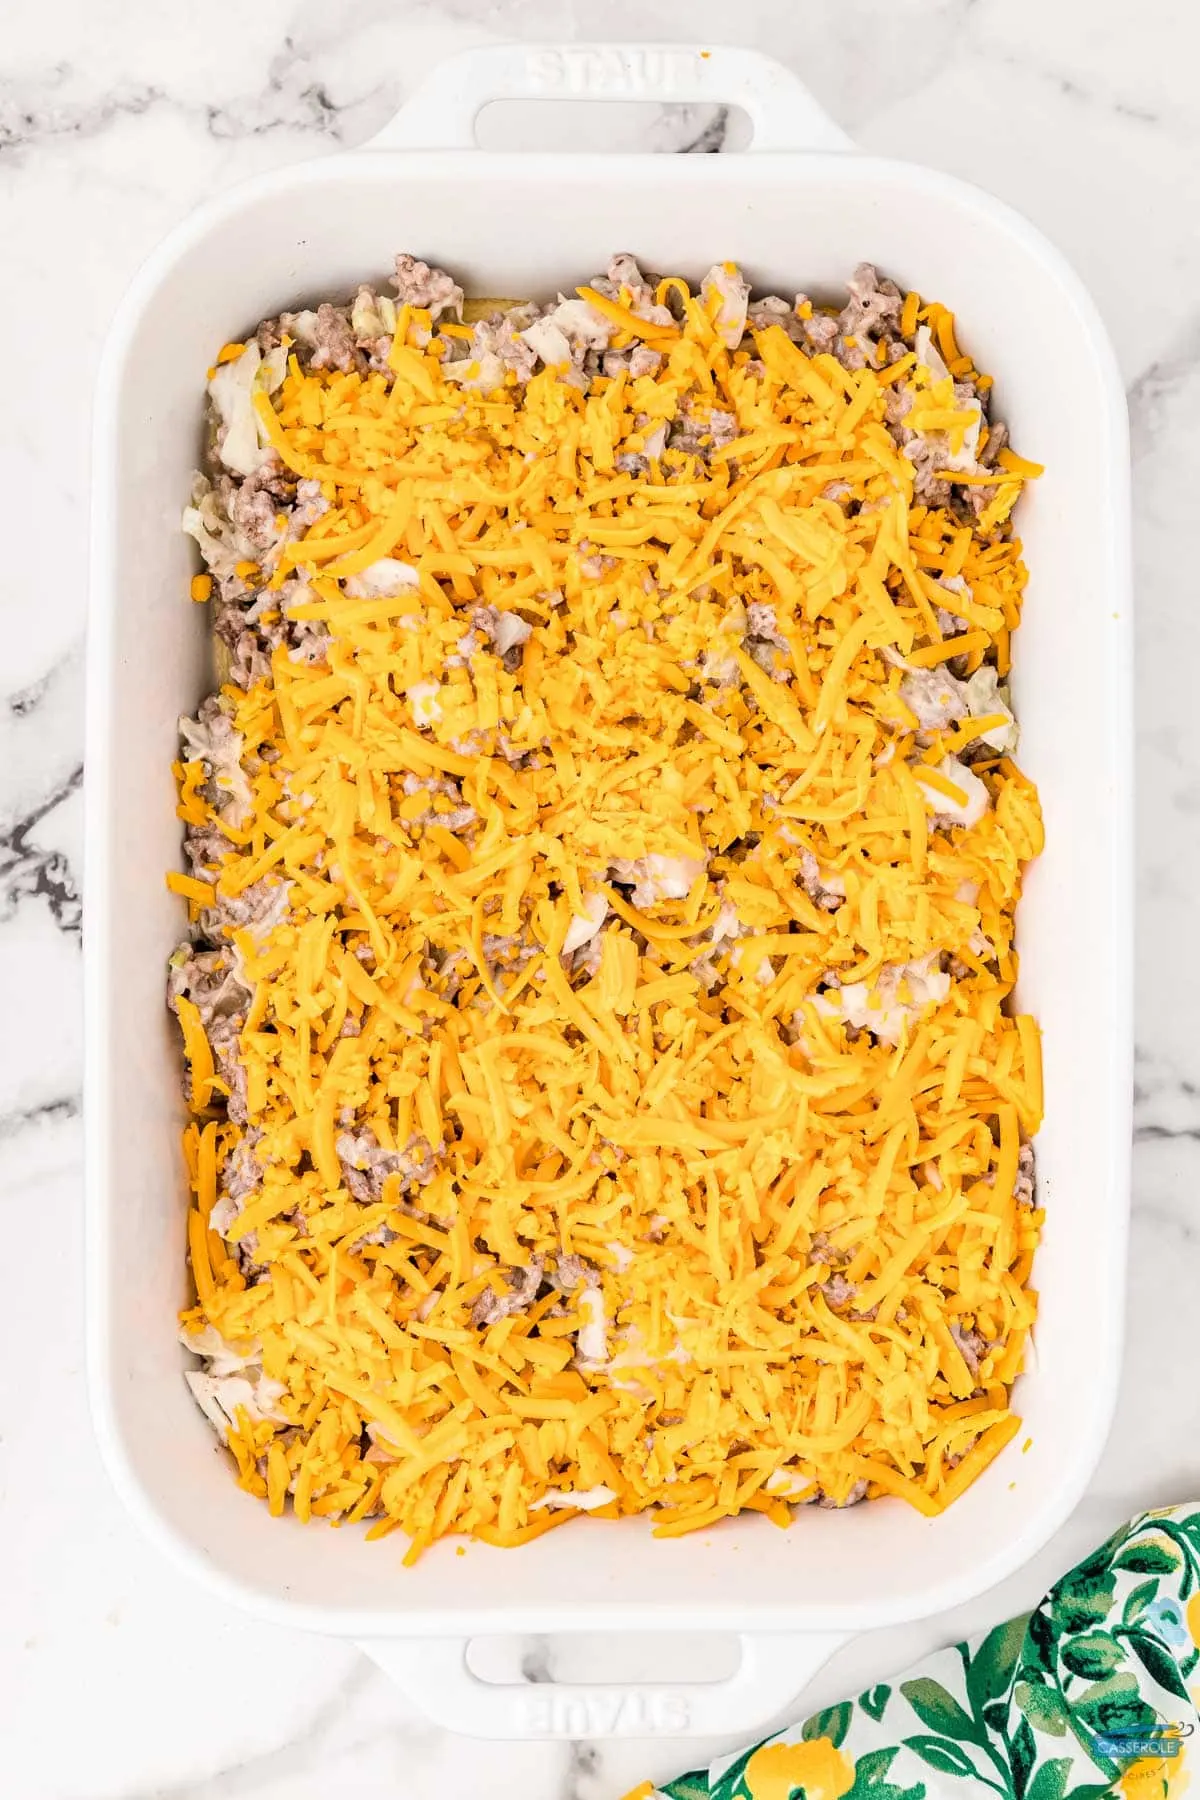 unbaked casserole covered in cheese in a white dish